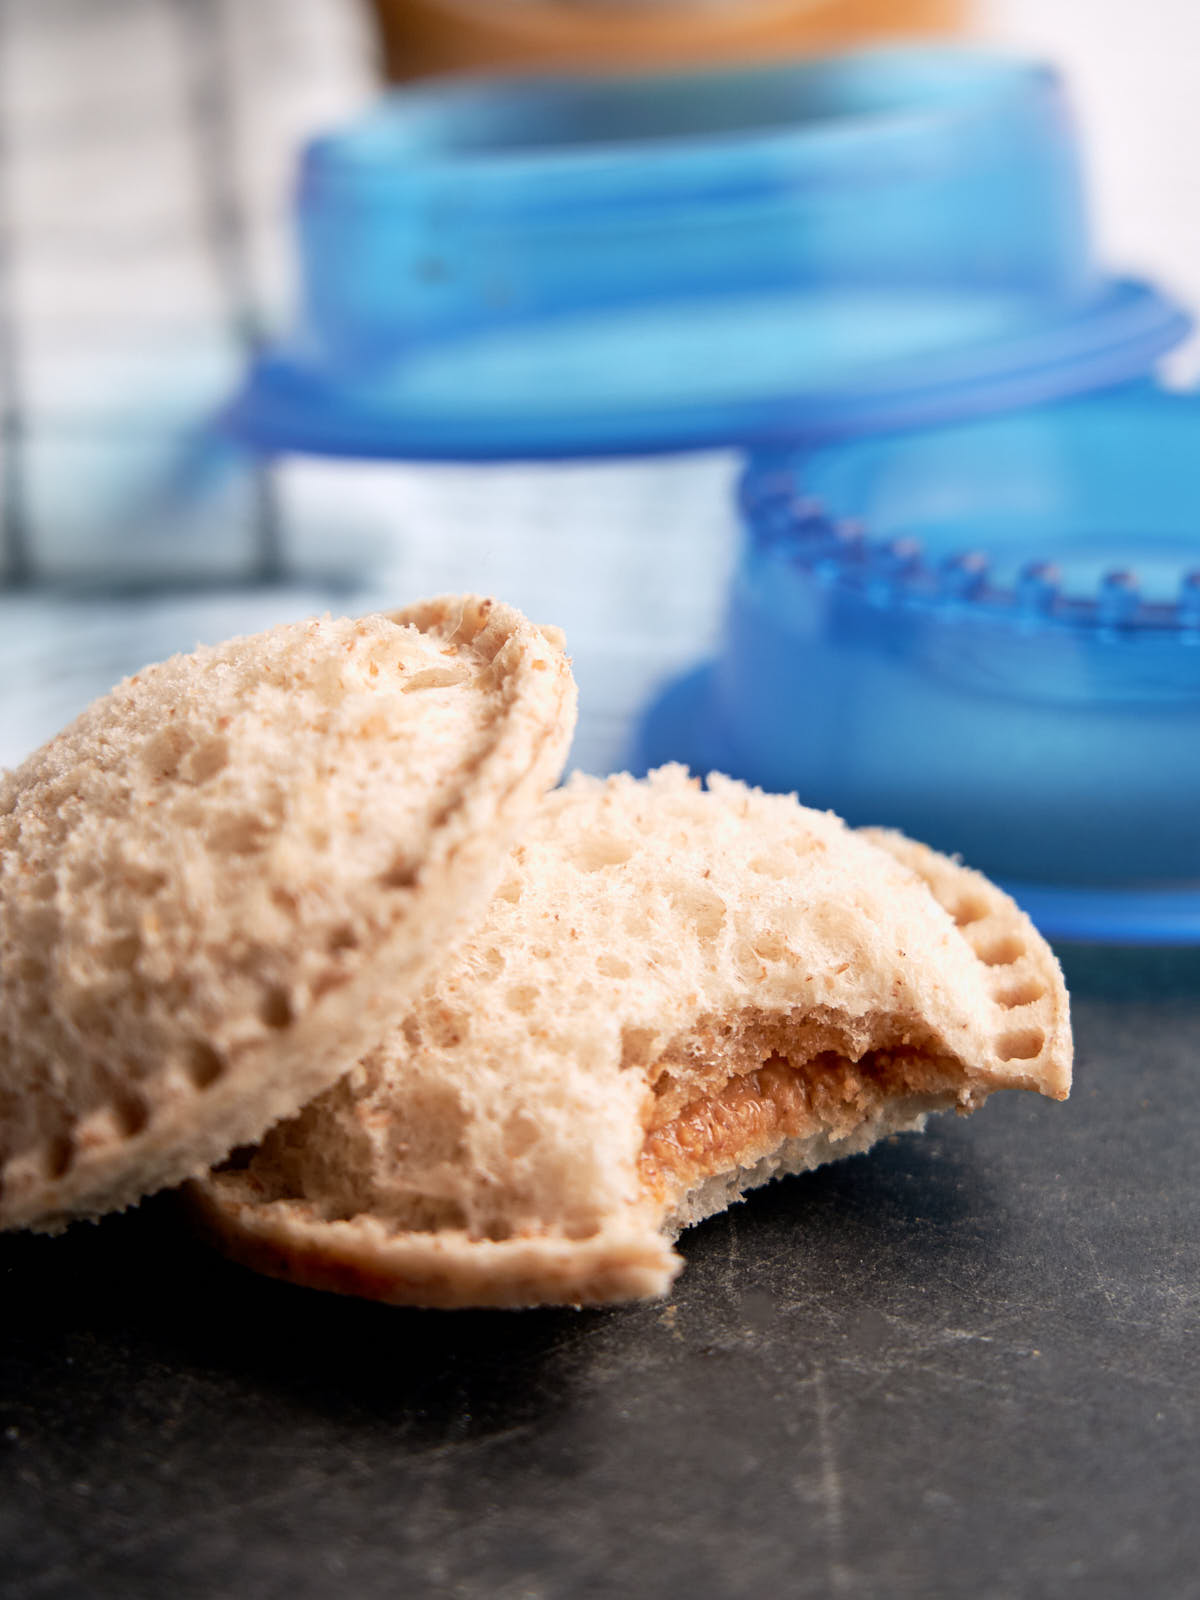 Peanut Butter and Honey Uncrustables recipe using a cutter and sealer